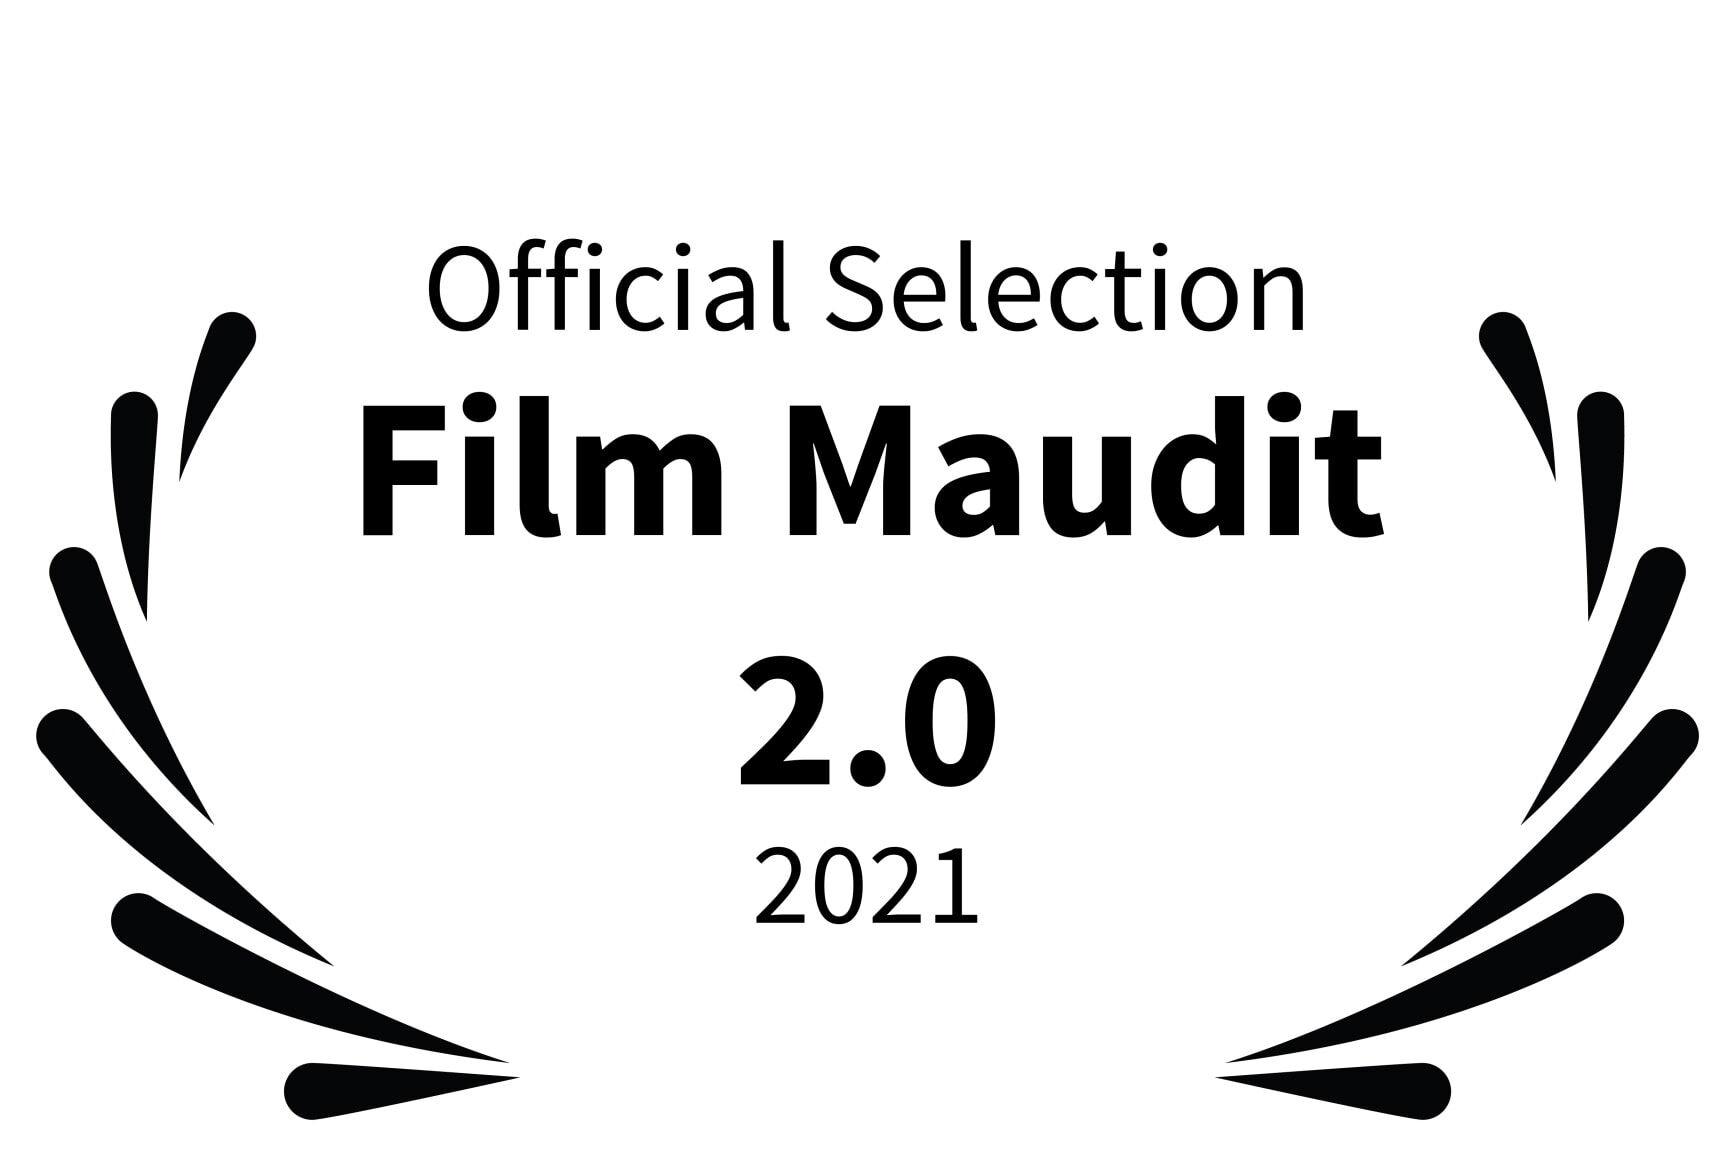 Official Selection - Film Maudit 2.0 - 2021